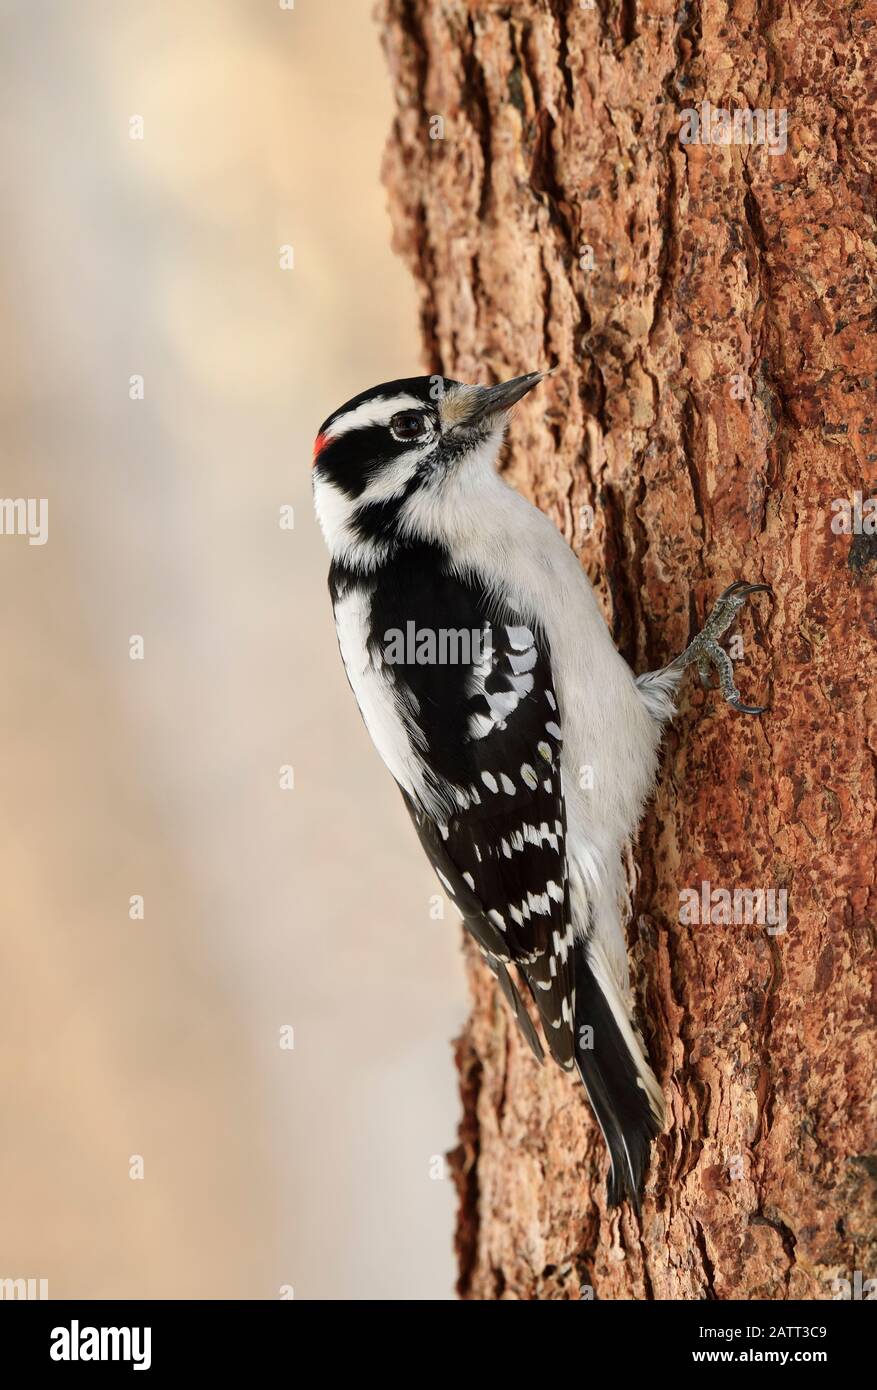 A wild Downey woodpecker perched on a spruce tree trunk foraging for insects under the bark in rural Alberta Canada. Stock Photo